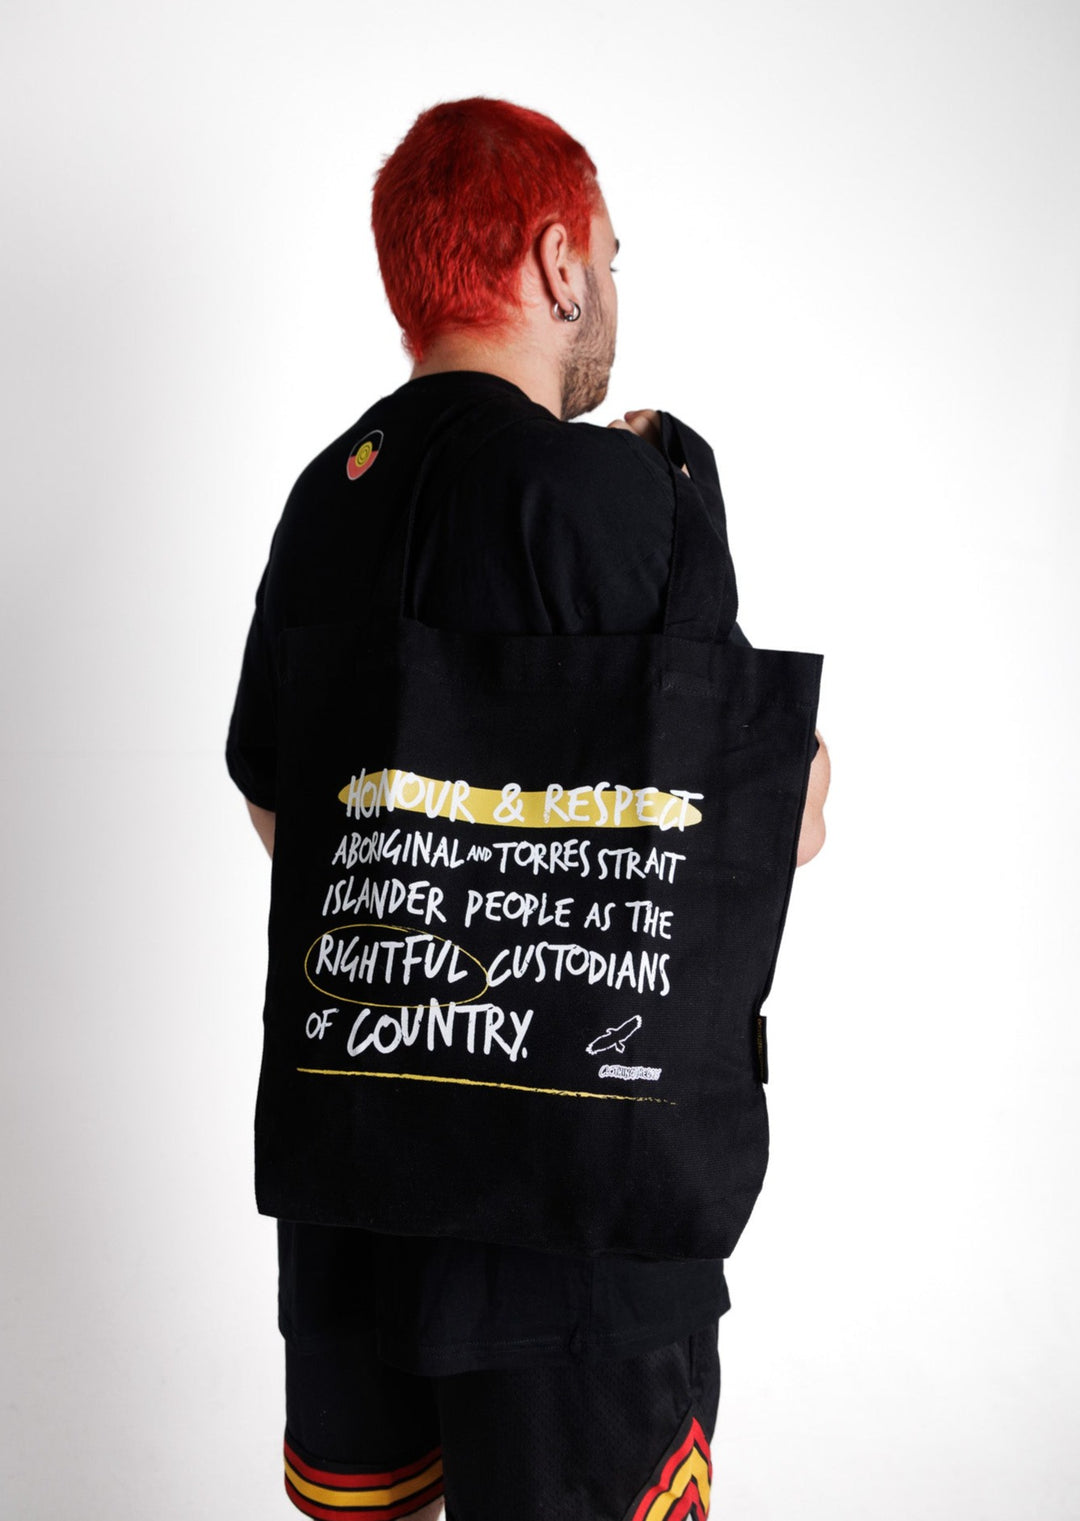 Clothing The Gaps. Honour Country Tote Bag. Black tote bag with 2 over the shoulder black straps. With white hand-writen style text 'Honour and respect Aboriginal and Torres Strait Islander people as the rightful custodians of country.' Circling 'rightful' underlining 'country' and highlighting 'honour and respect' in a sand yellow colour. Outlined 'bunjil' eagle in right corner.